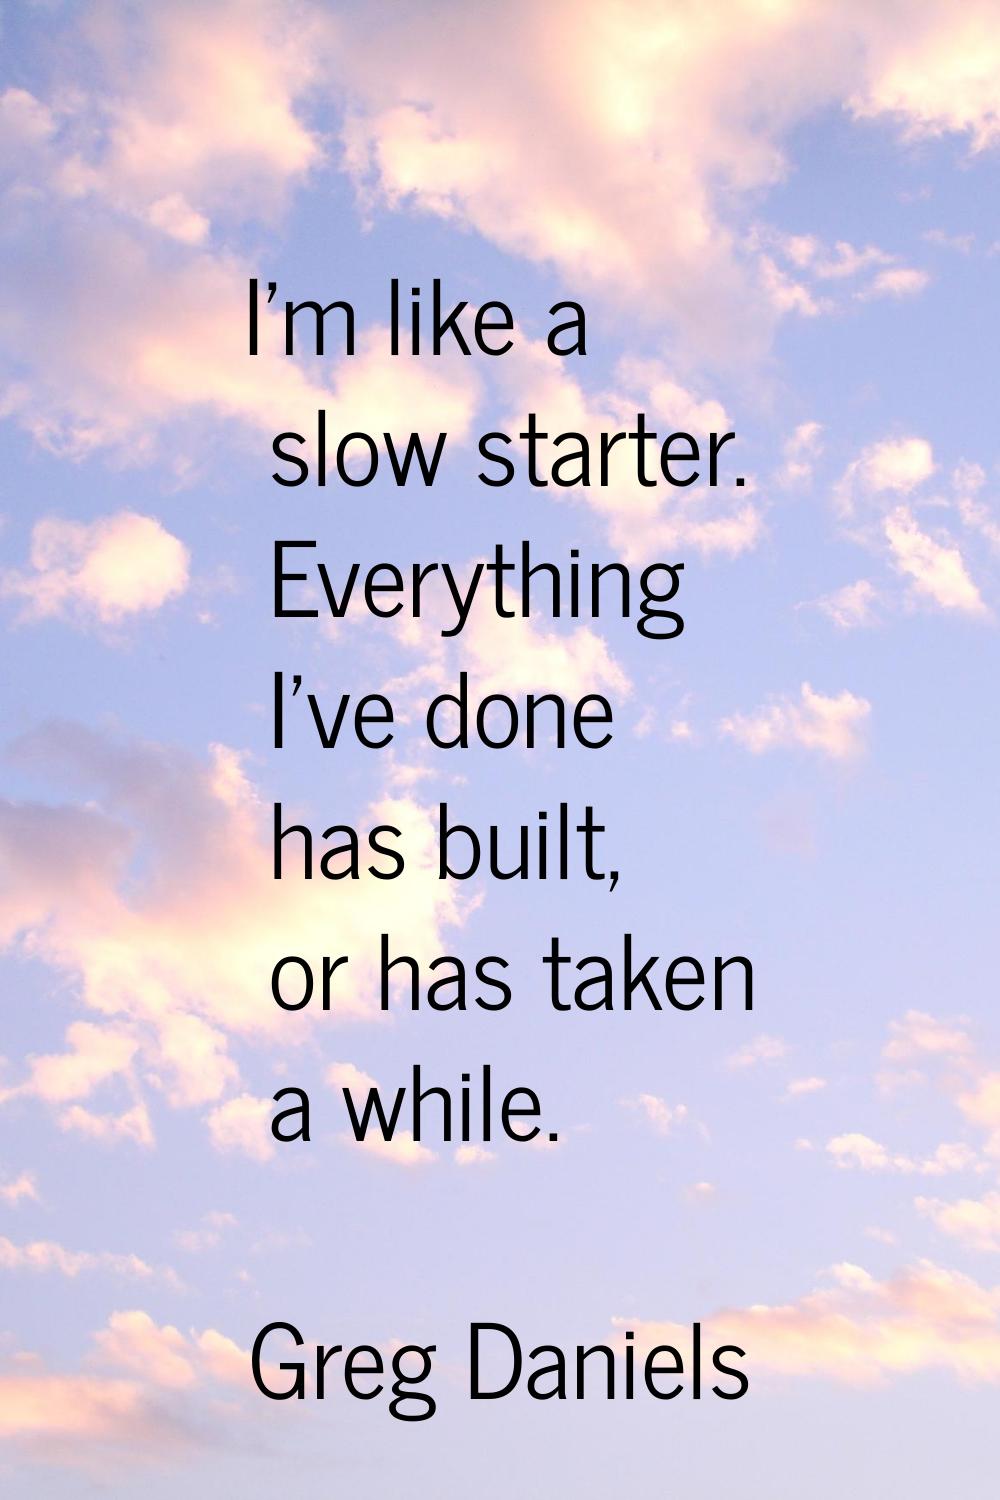 I'm like a slow starter. Everything I've done has built, or has taken a while.